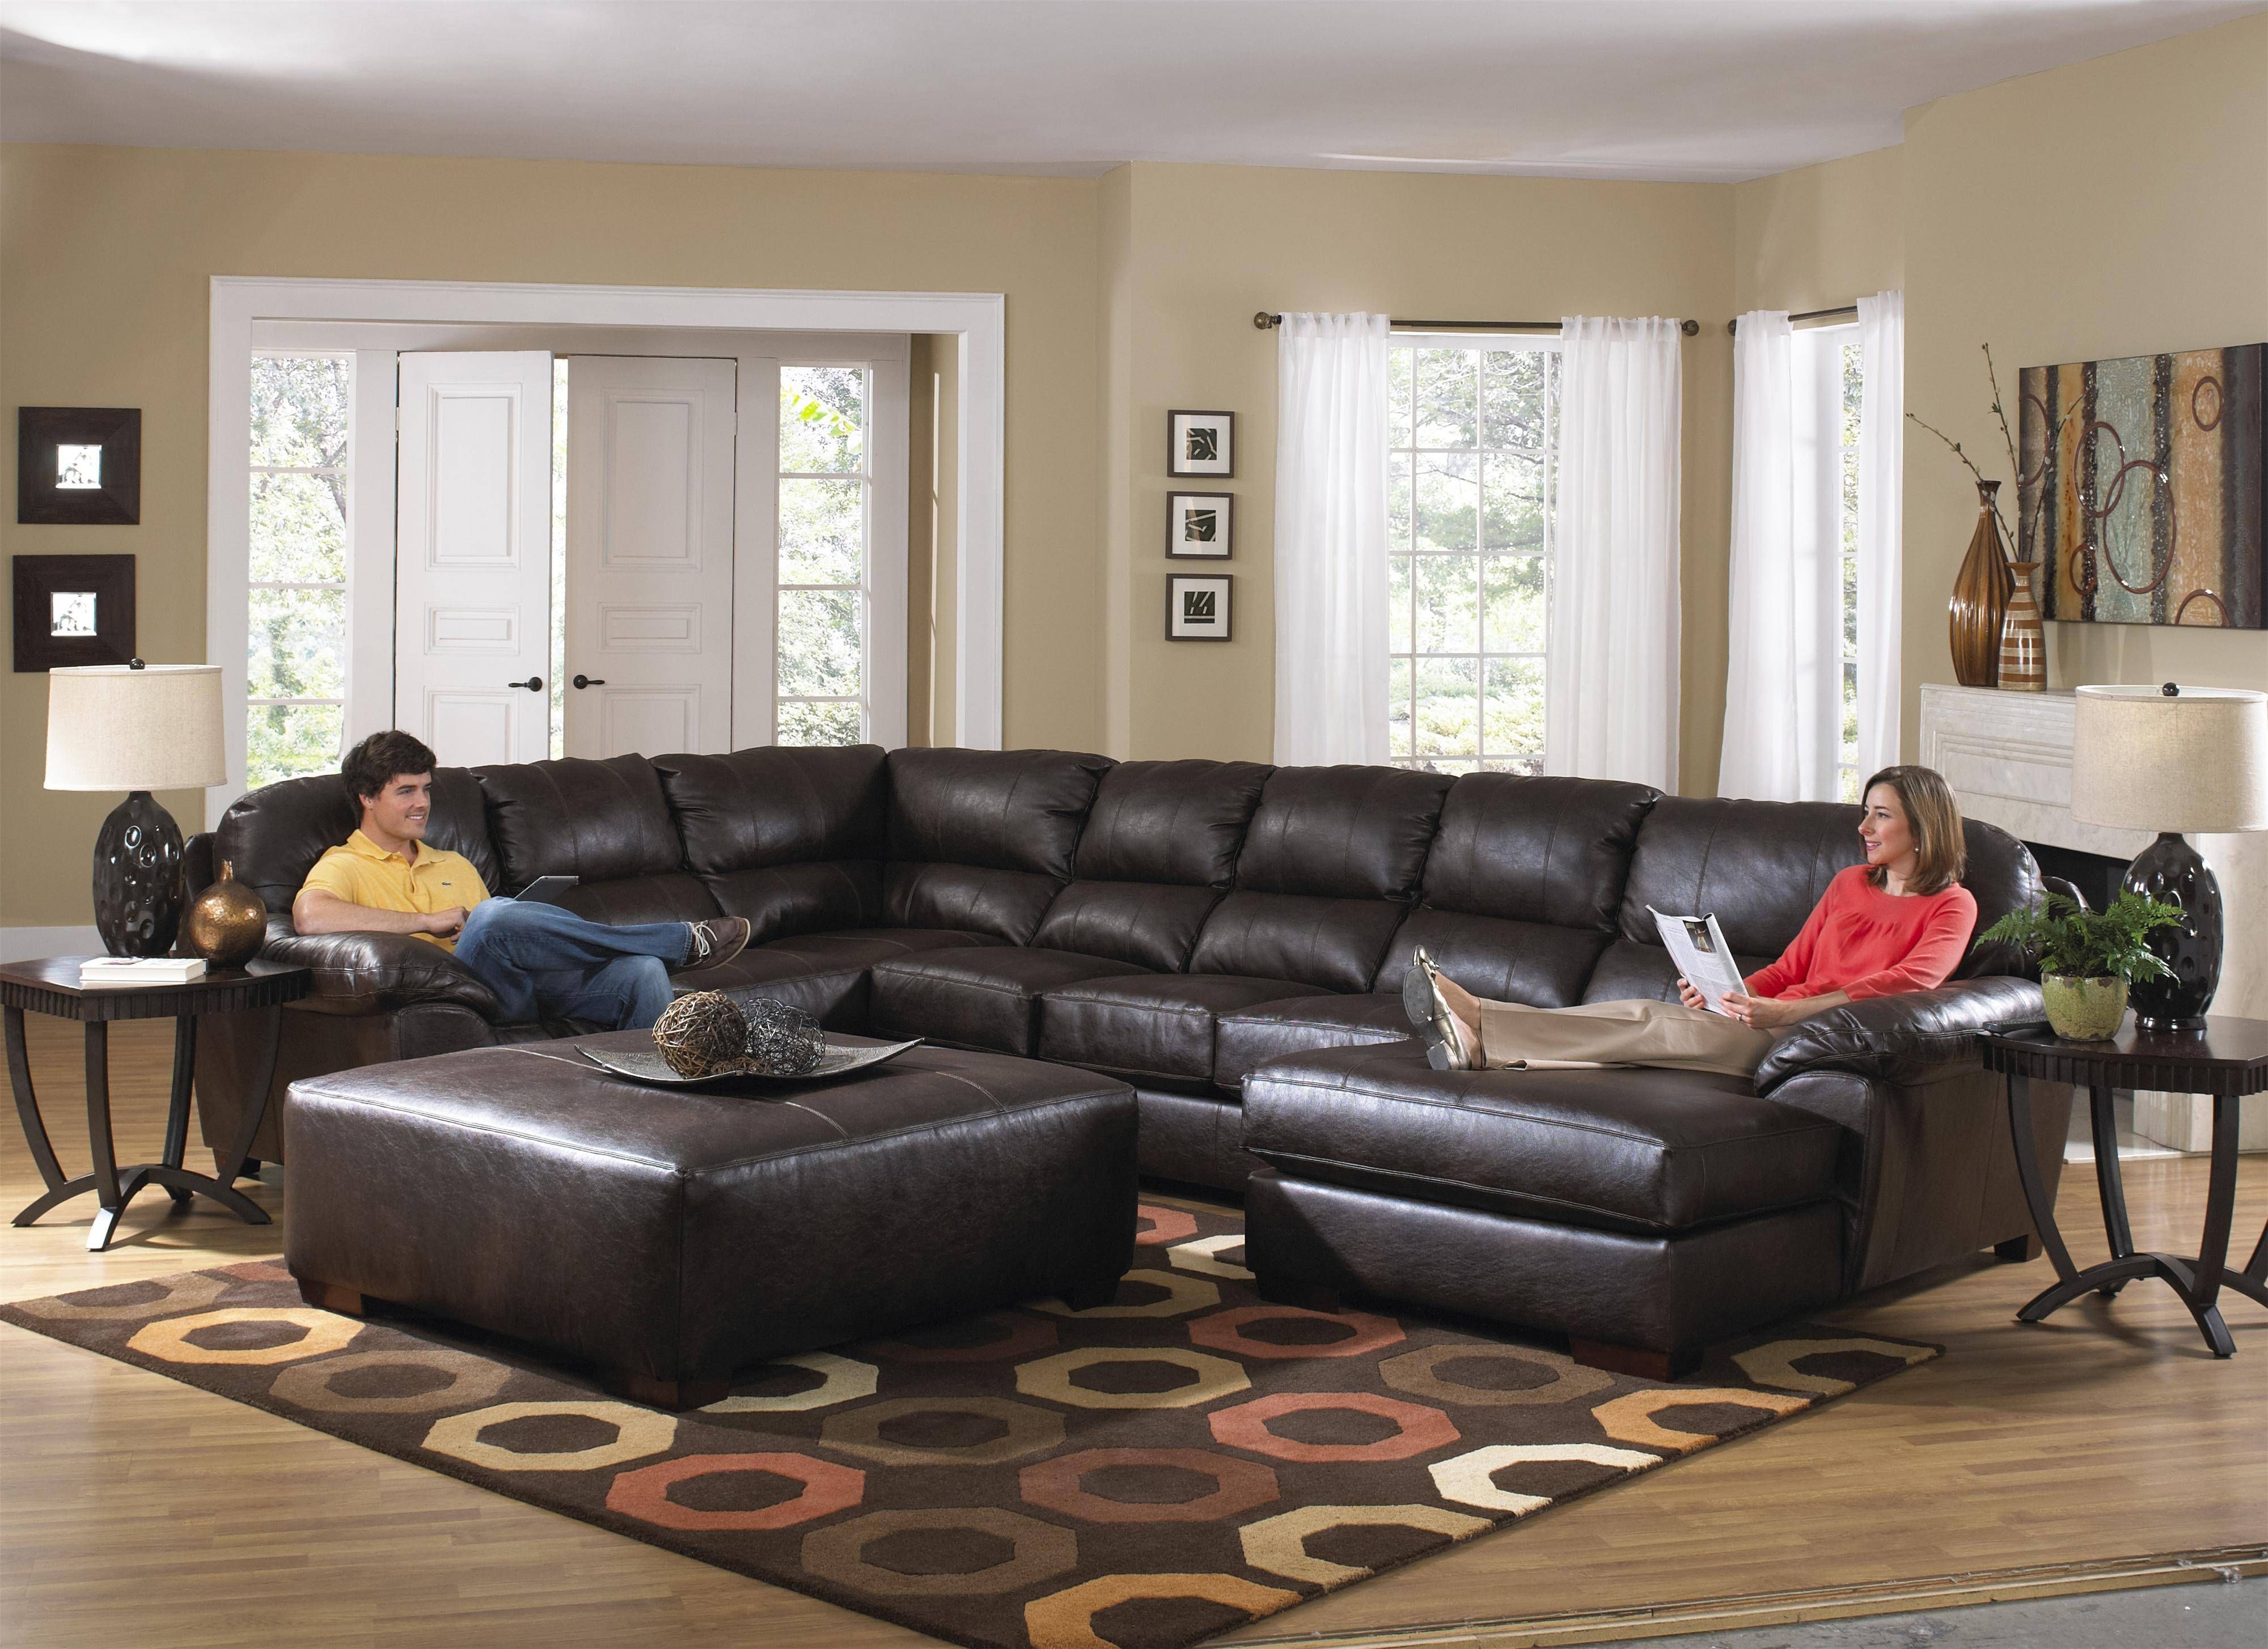 Furniture: Interesting Living Room Interior Using Large Sectional Intended For Big Comfy Sofas (View 8 of 15)